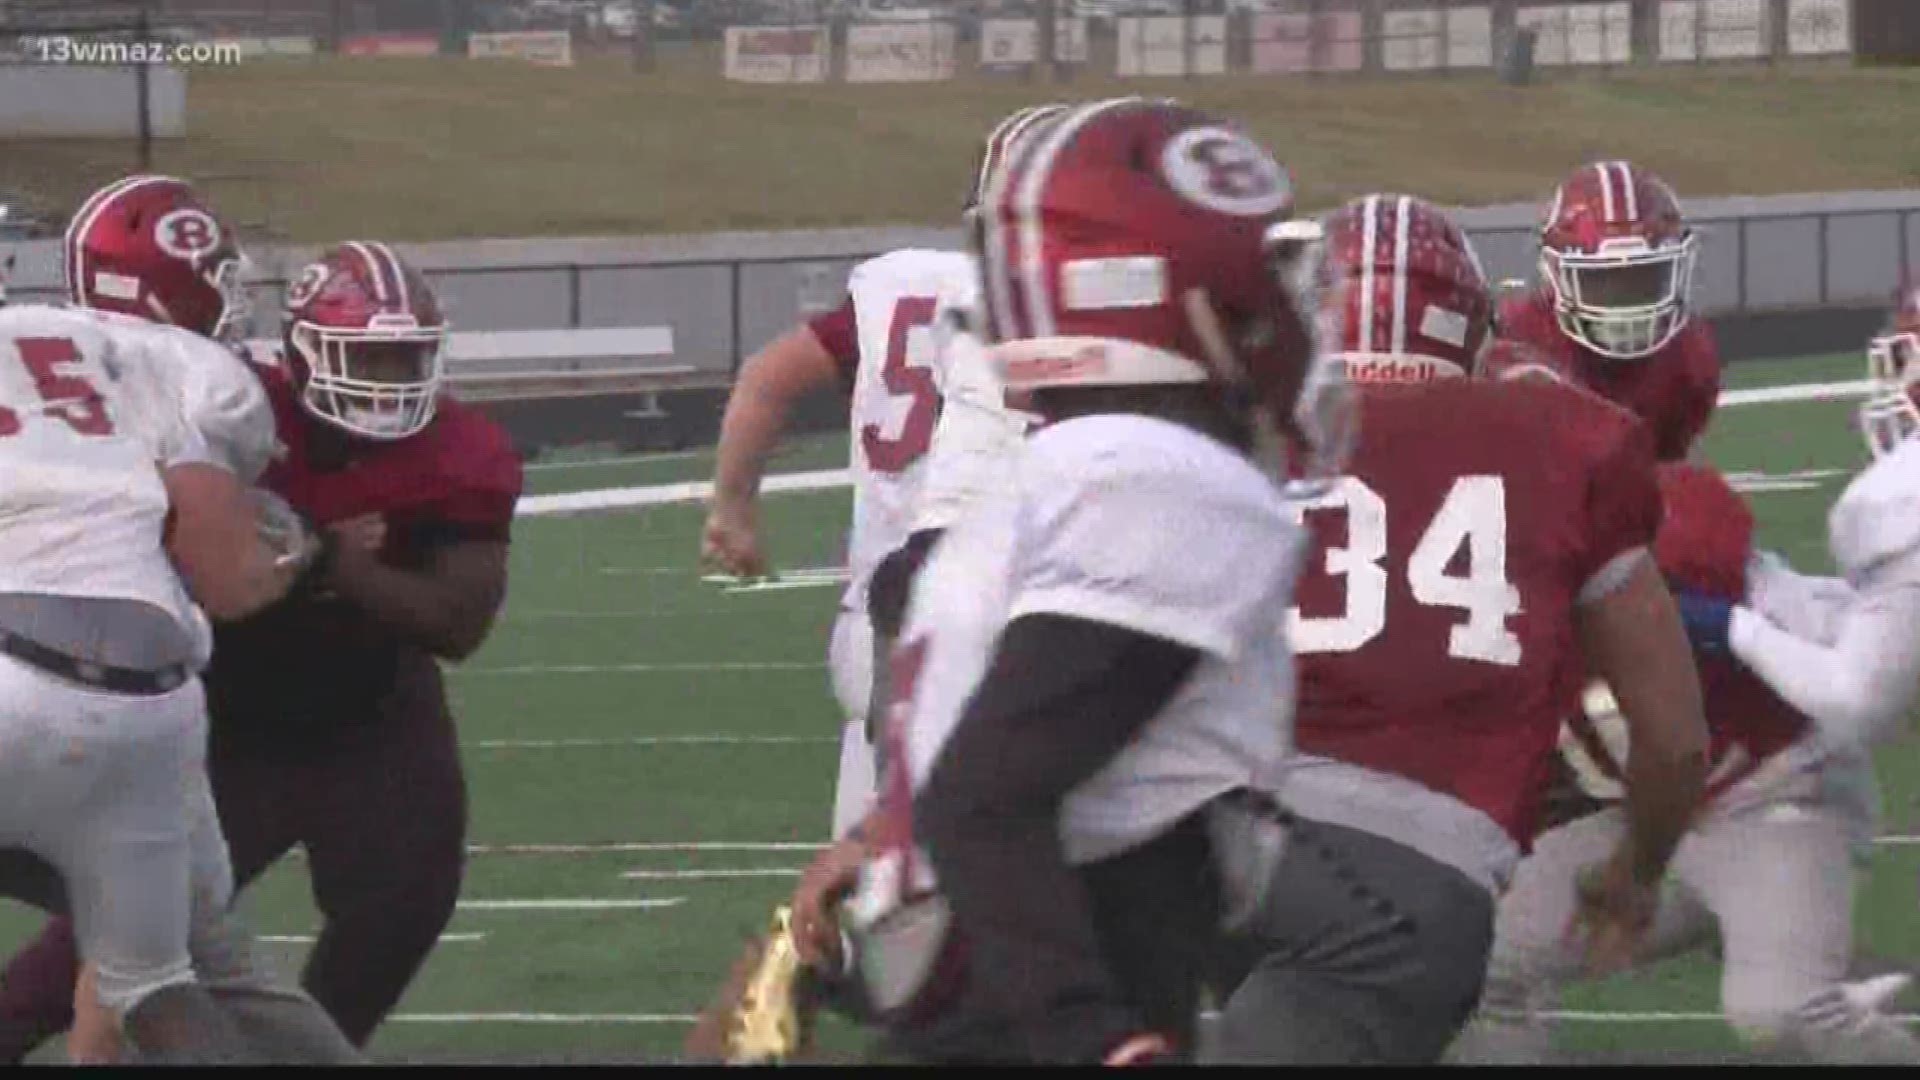 Two teams are still alive in the football playoff hunt in Warner Robins, hoping to make an impact in the Elite 8 to advance to the Final Four next week.